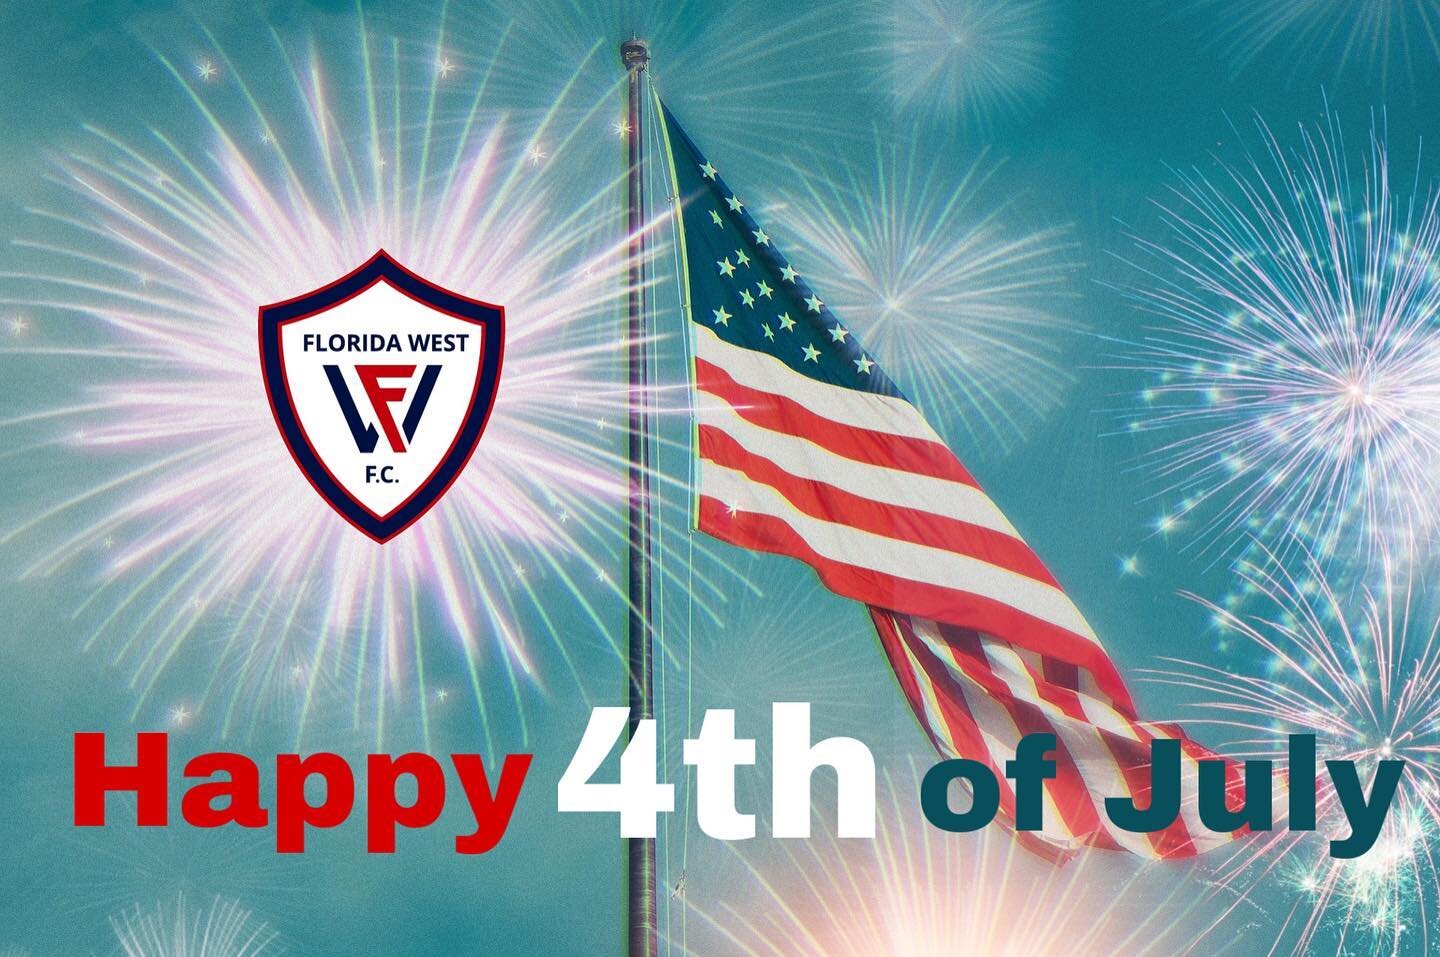 Happy 4th of July from all of us here at Florida West FC #4thofjuly #celebrate #independenceday #1inSWFL #FLWestFC #SuccessisaChoice #bmwofnaples